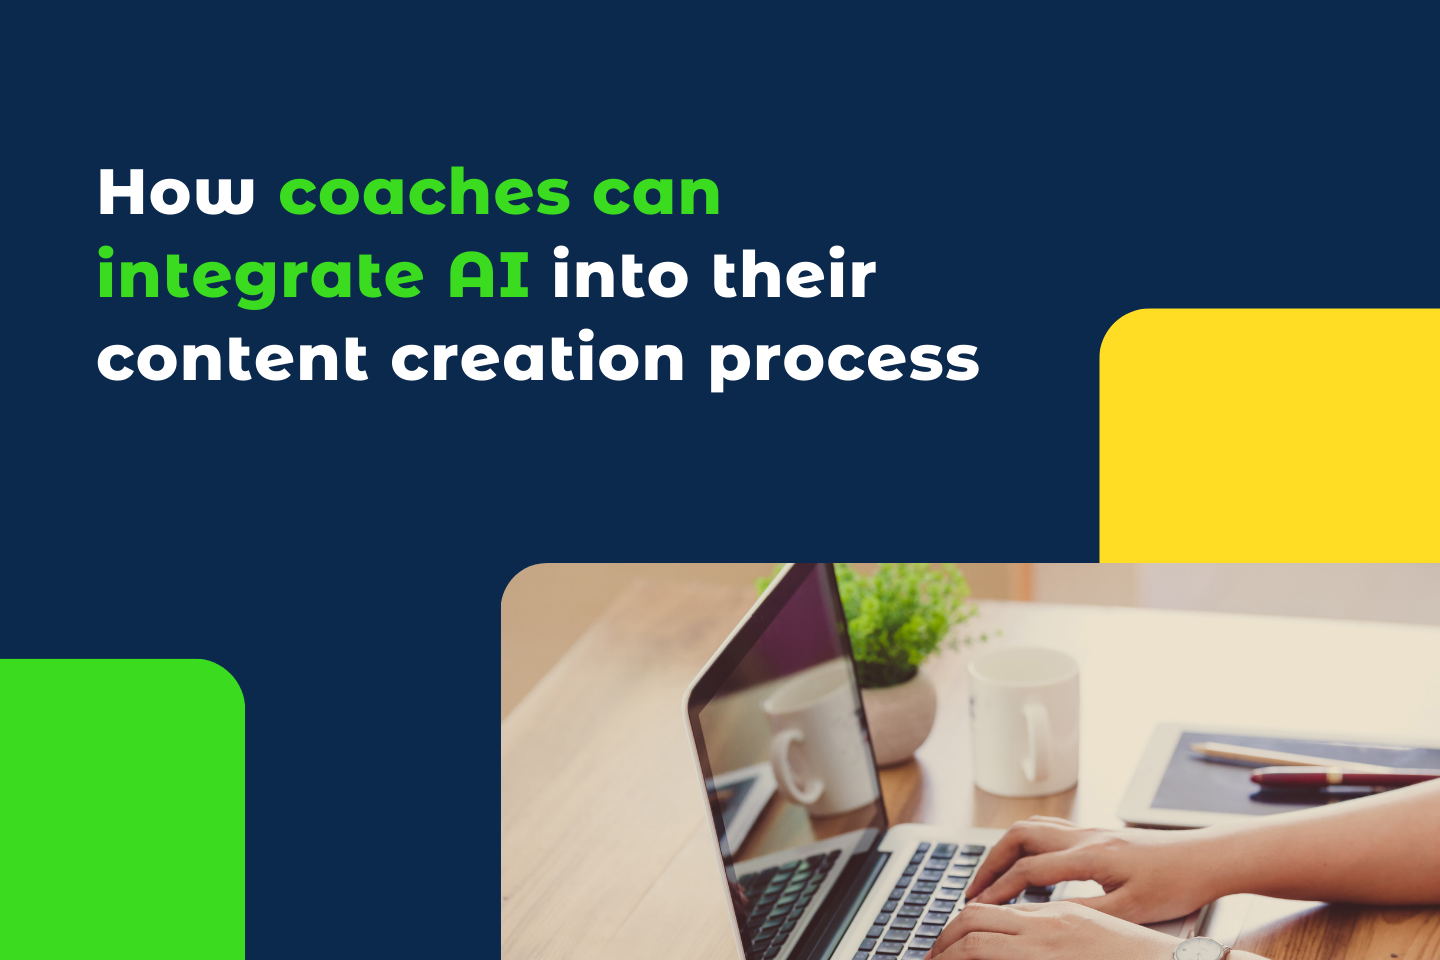 How Coaches Can Integrate AI into Their Content Creation Process